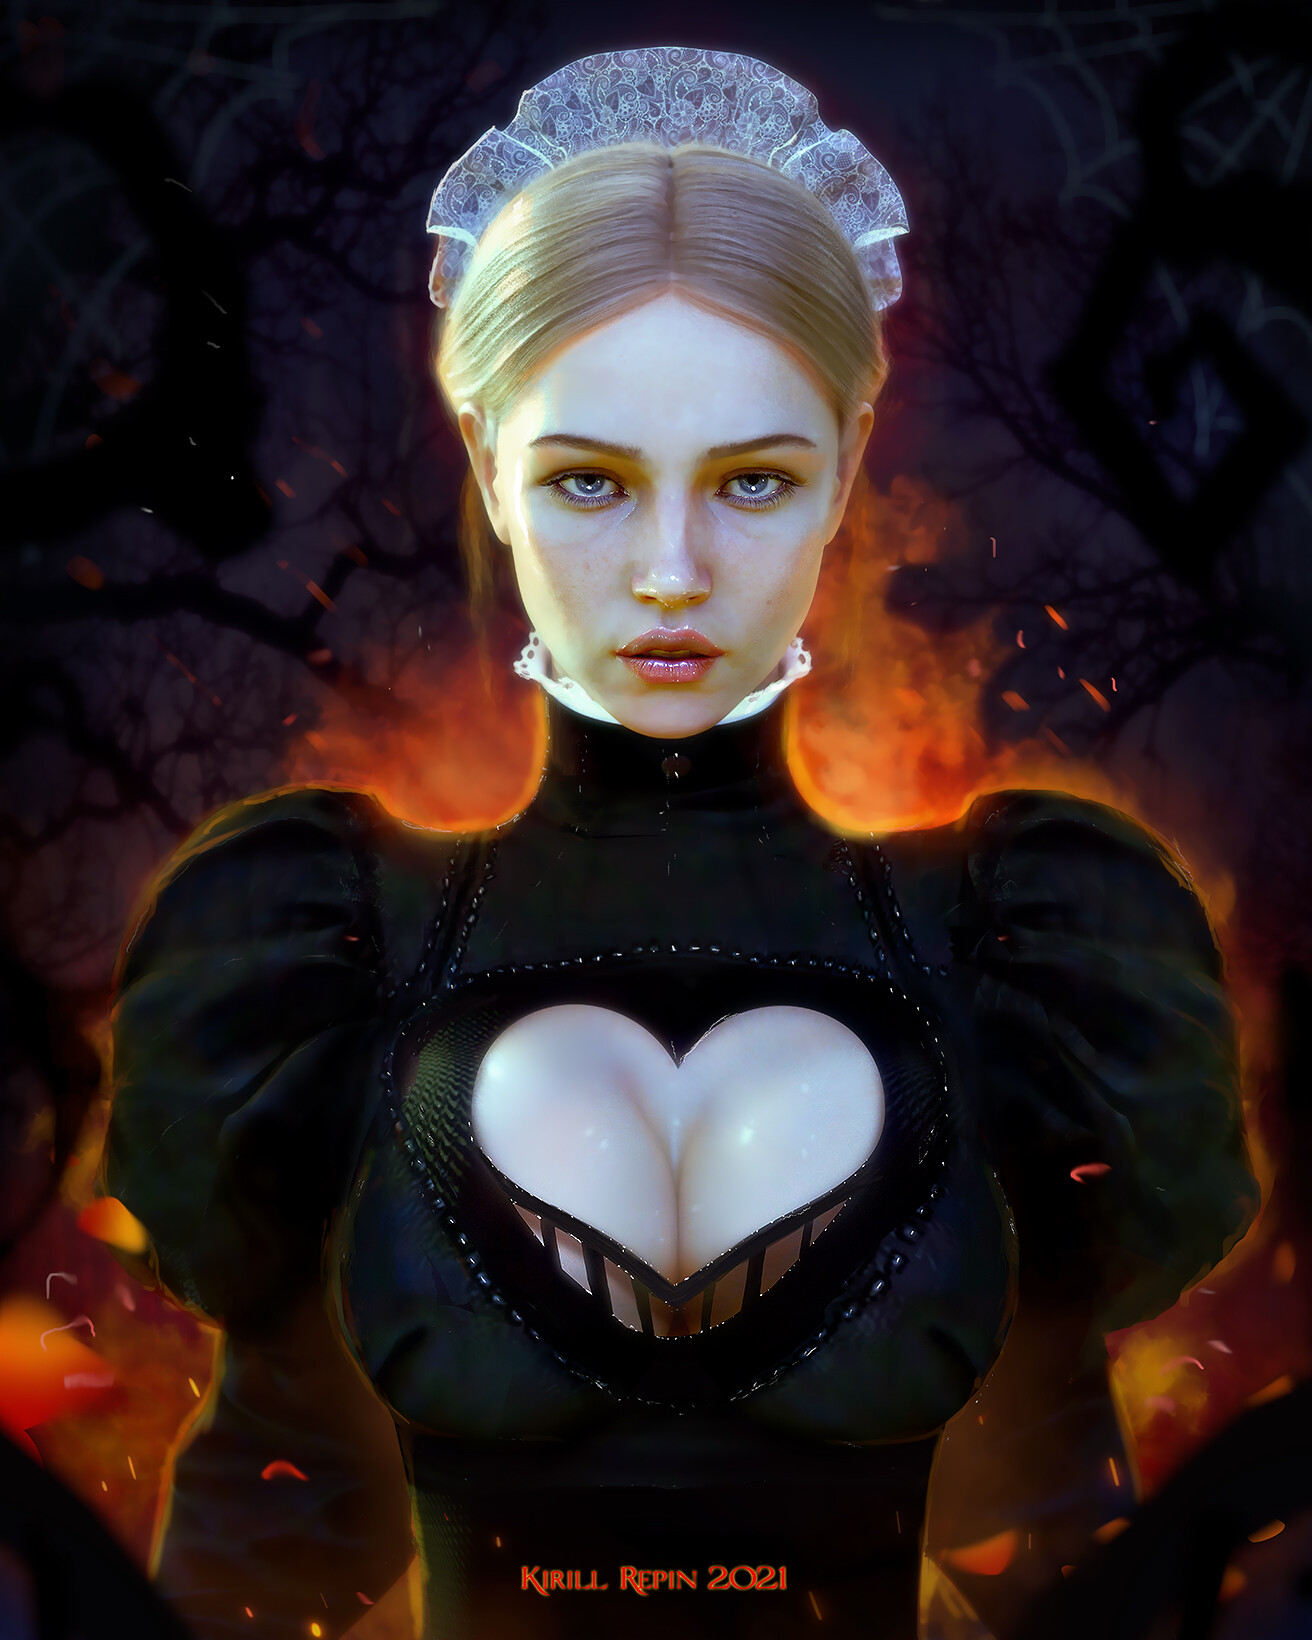 Kirill Repin Drawing Women Maid Maid Outfit Heart Design Black Clothing Fire Forest 1312x1640